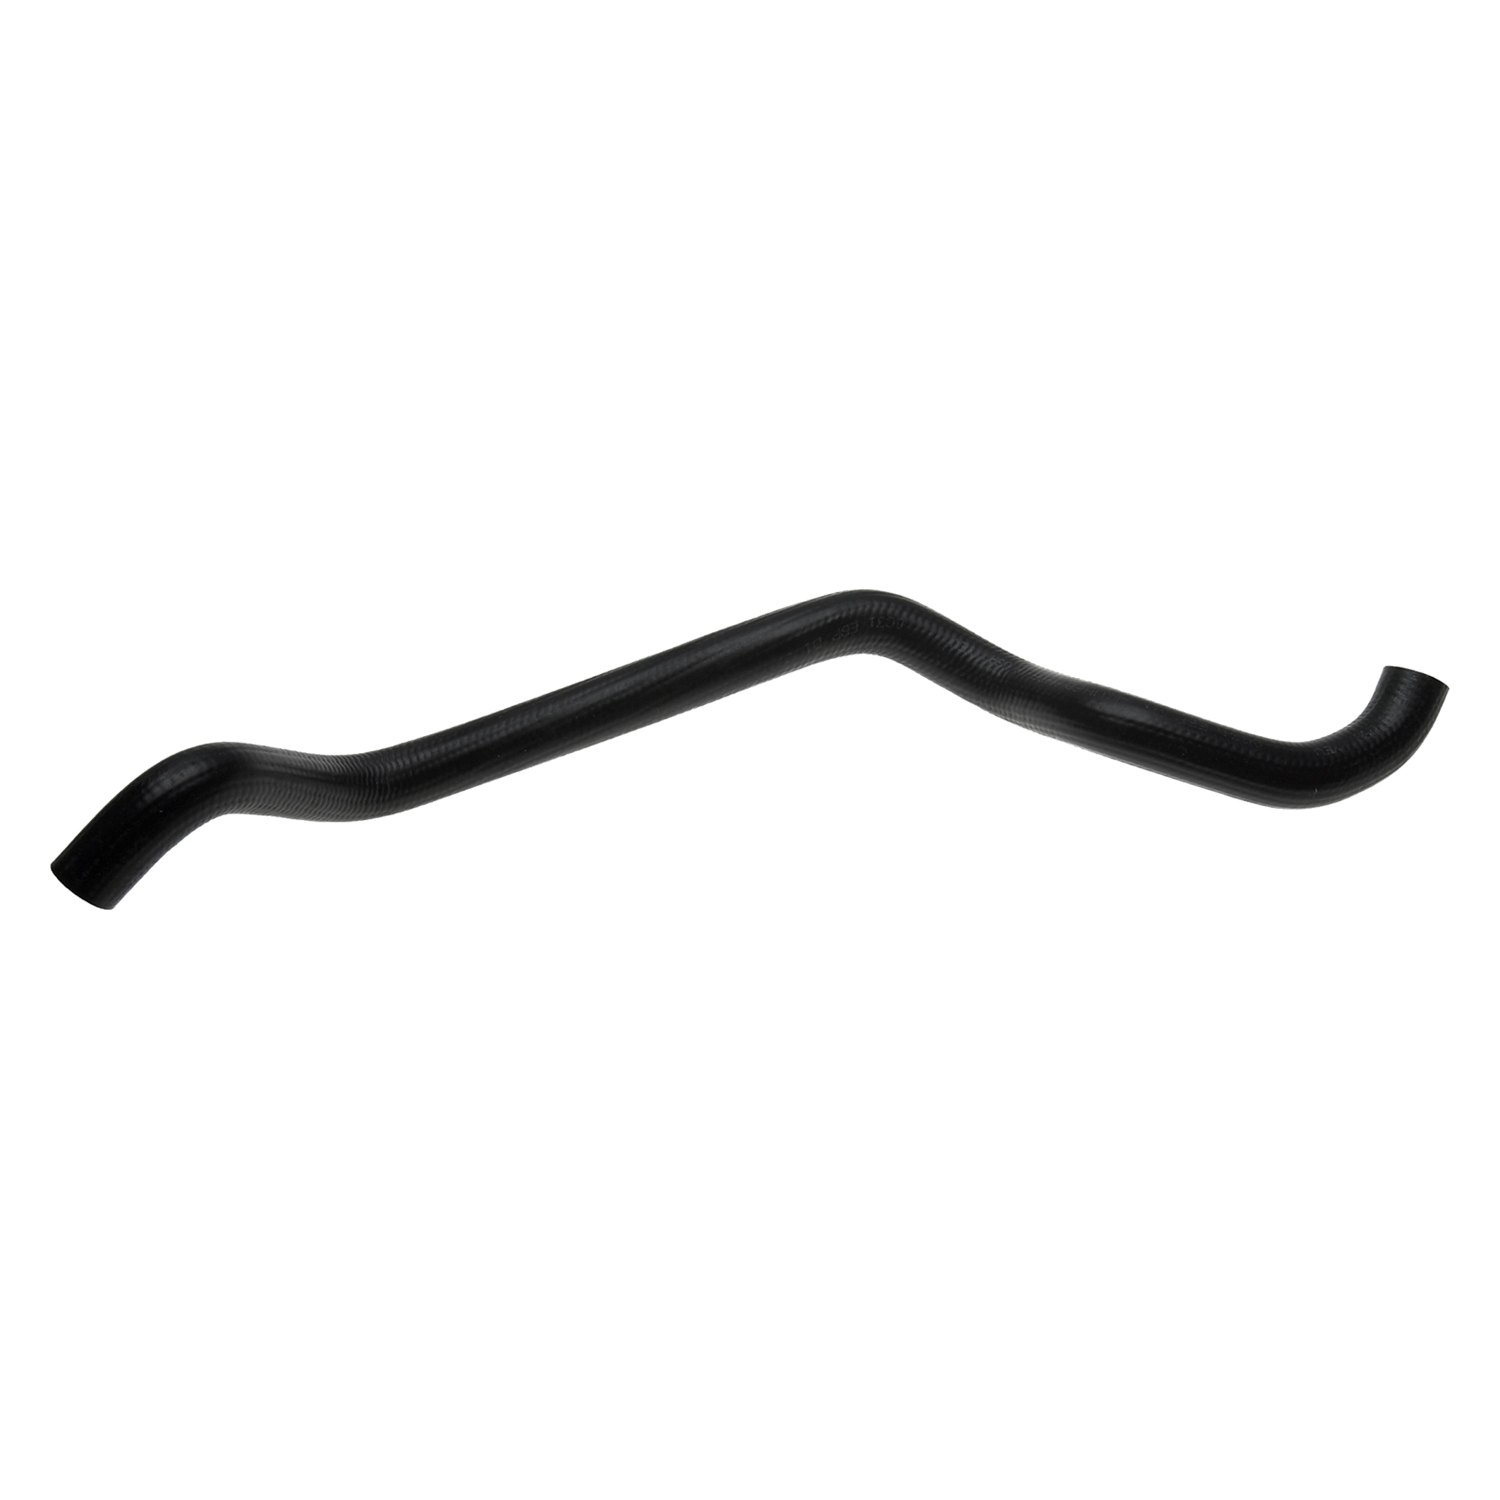 ACDelco 16247M Professional Molded Heater Hose